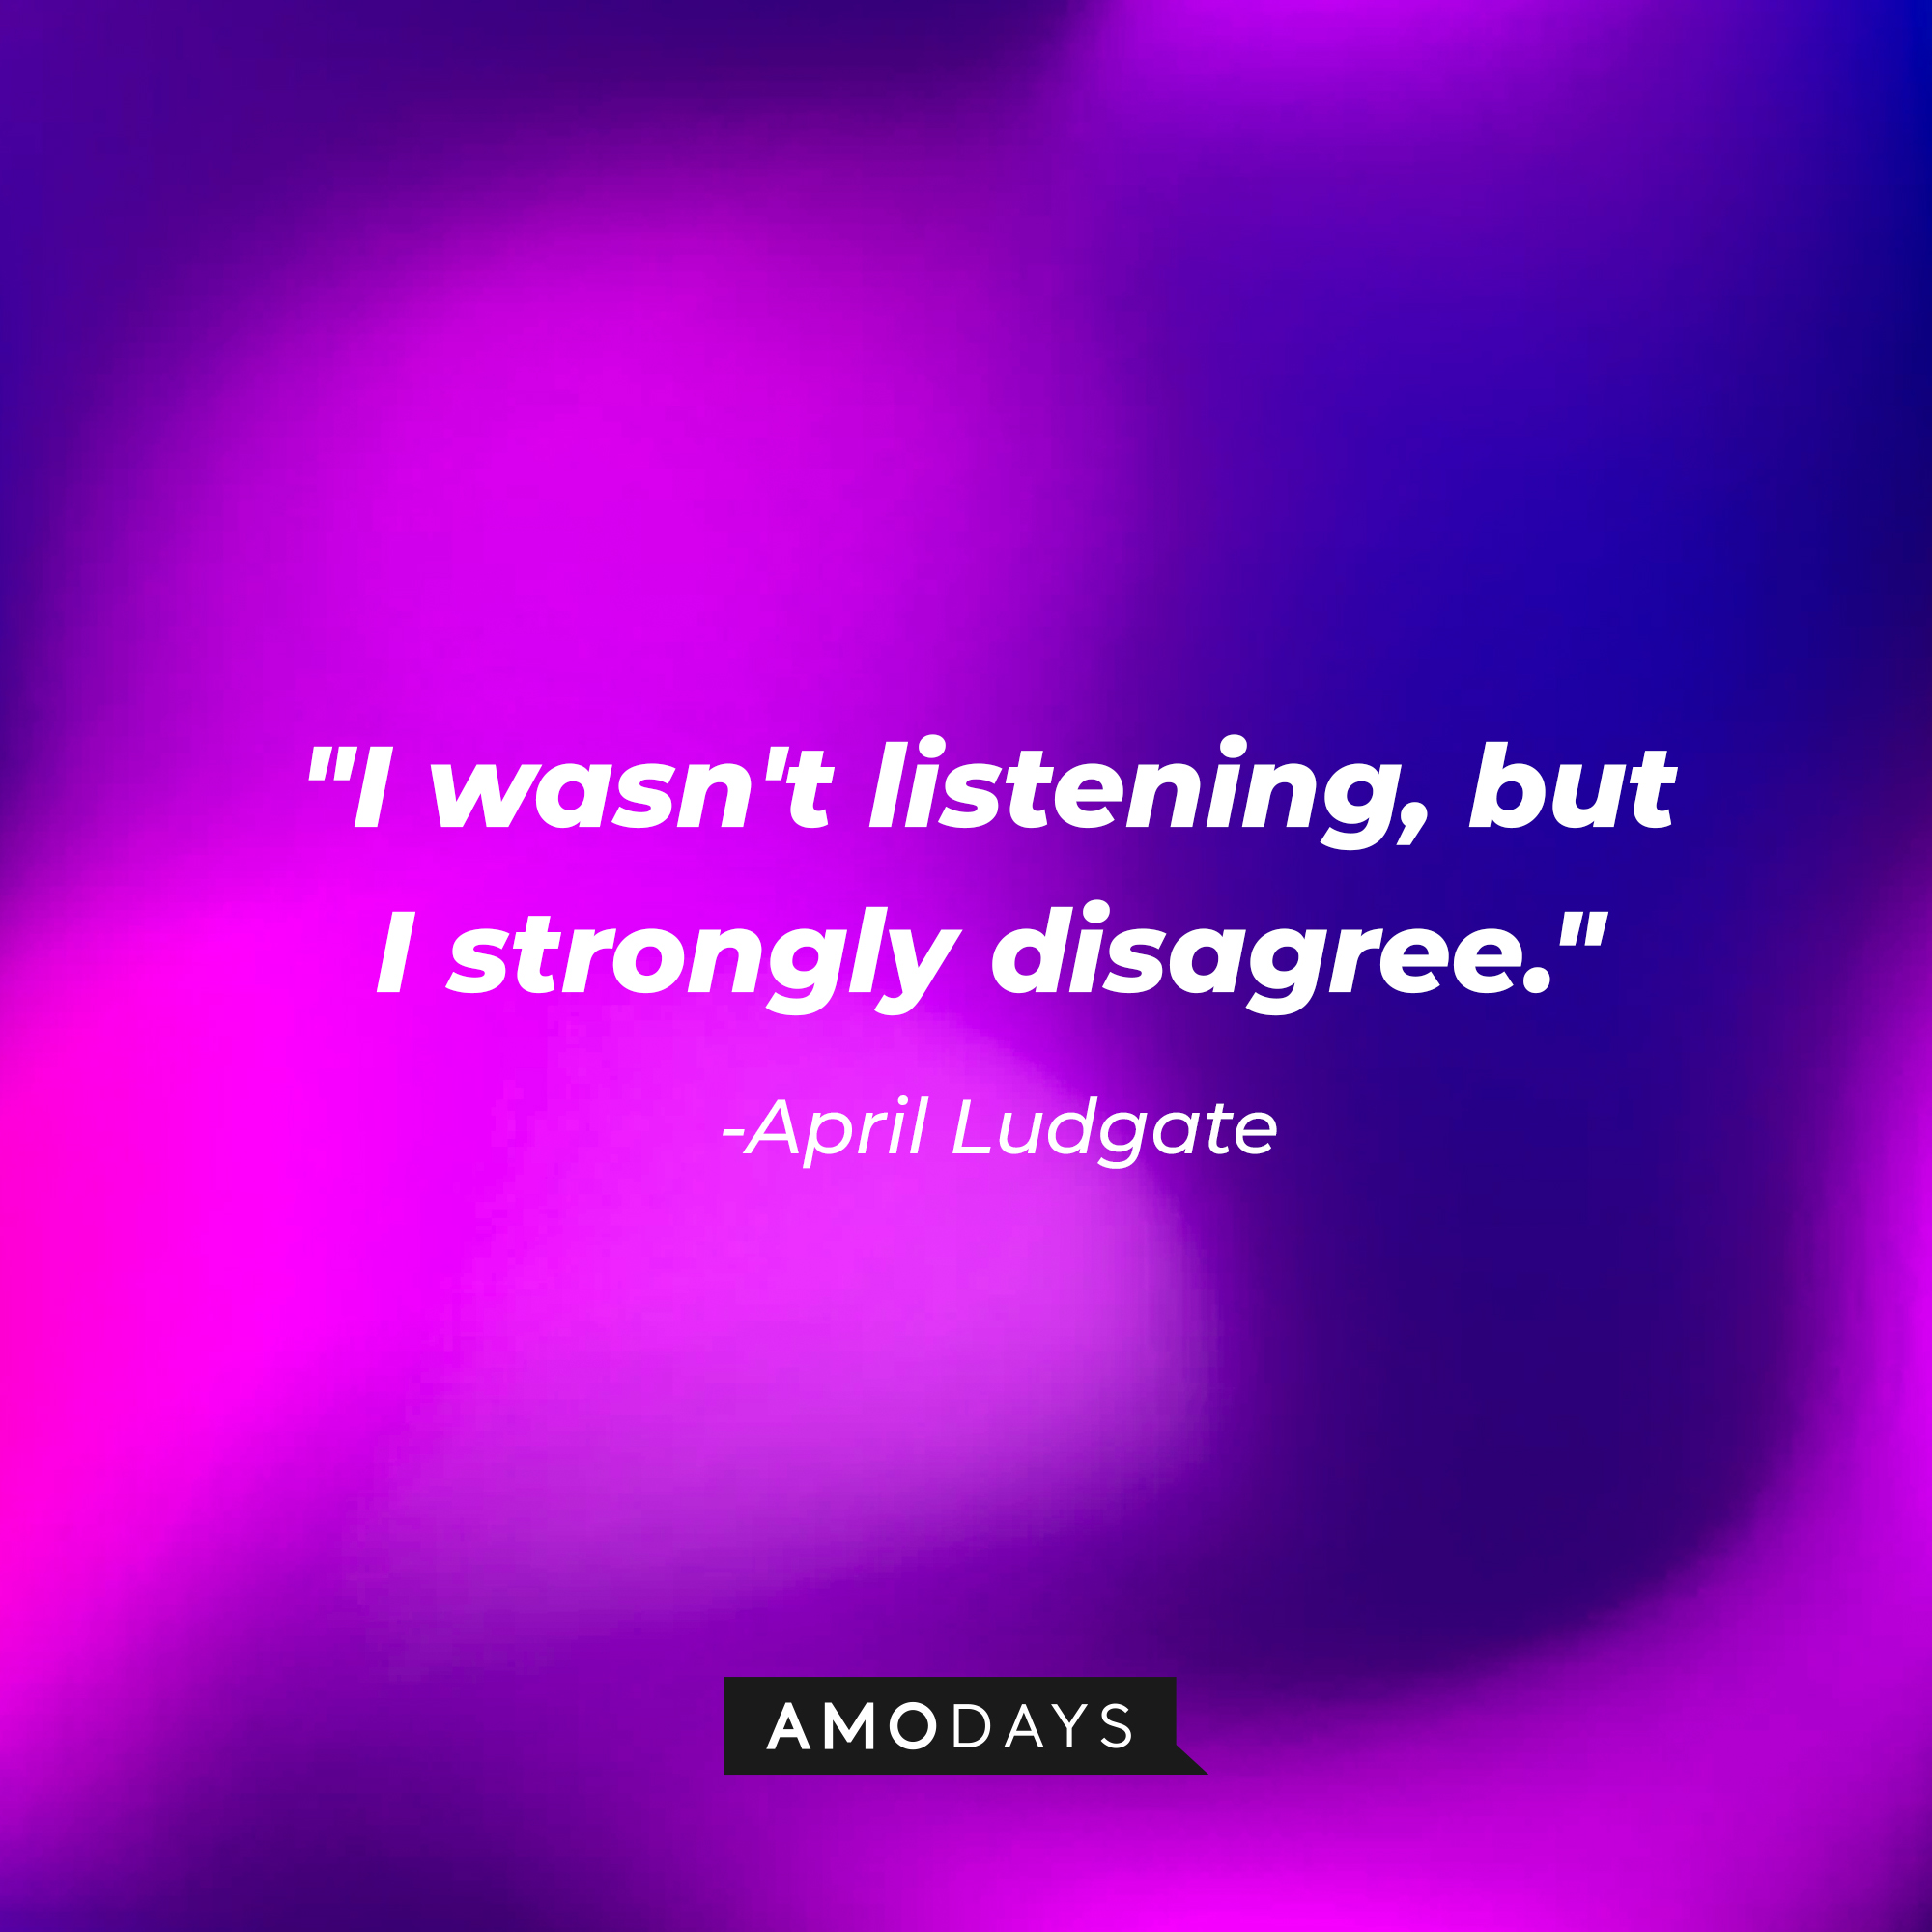 April Ludgate's quote, "I wasn't listening, but I strongly disagree." | Source: AmoDays